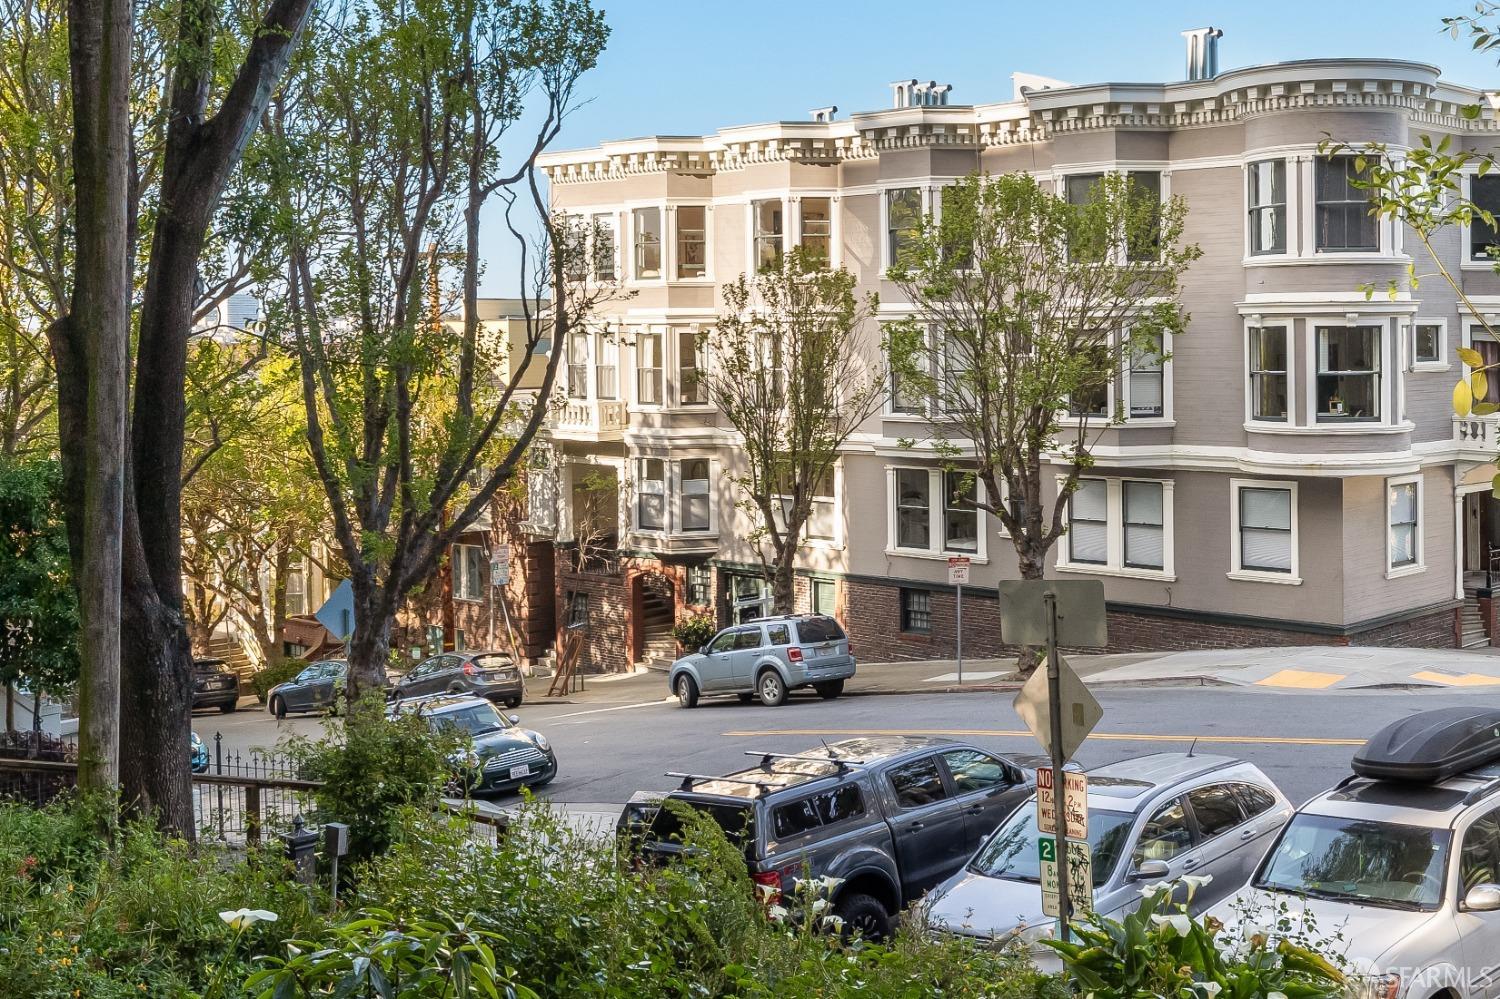 Photo of 16 Broderick St in San Francisco, CA